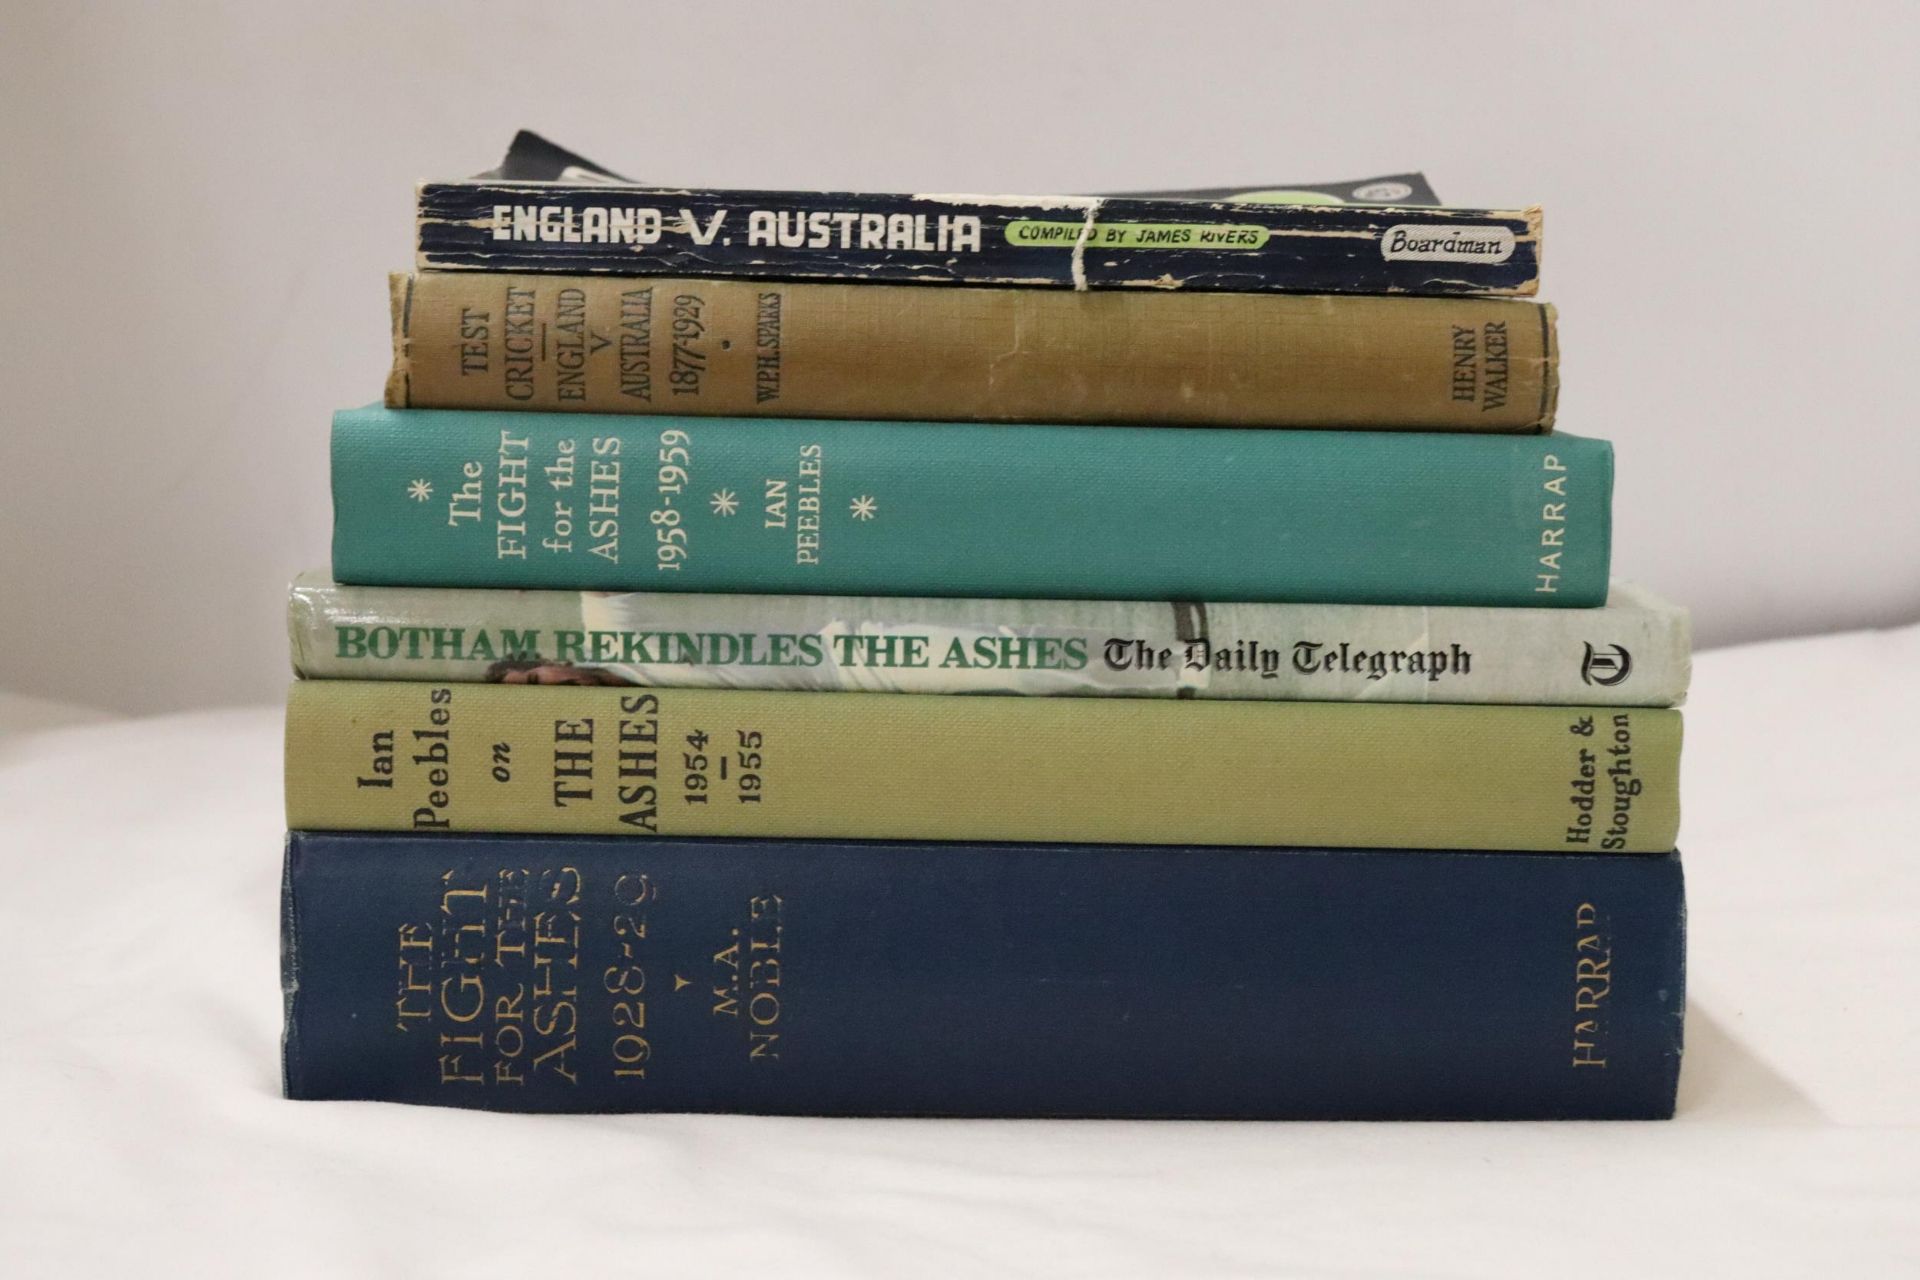 SIX ENGLAND V AUSTRALIA 'ASHES' THEMED BOOKS TO INCLUDE, THE FIGHT FOR THE ASHES, 1928-29, BOTHAM - Image 2 of 3